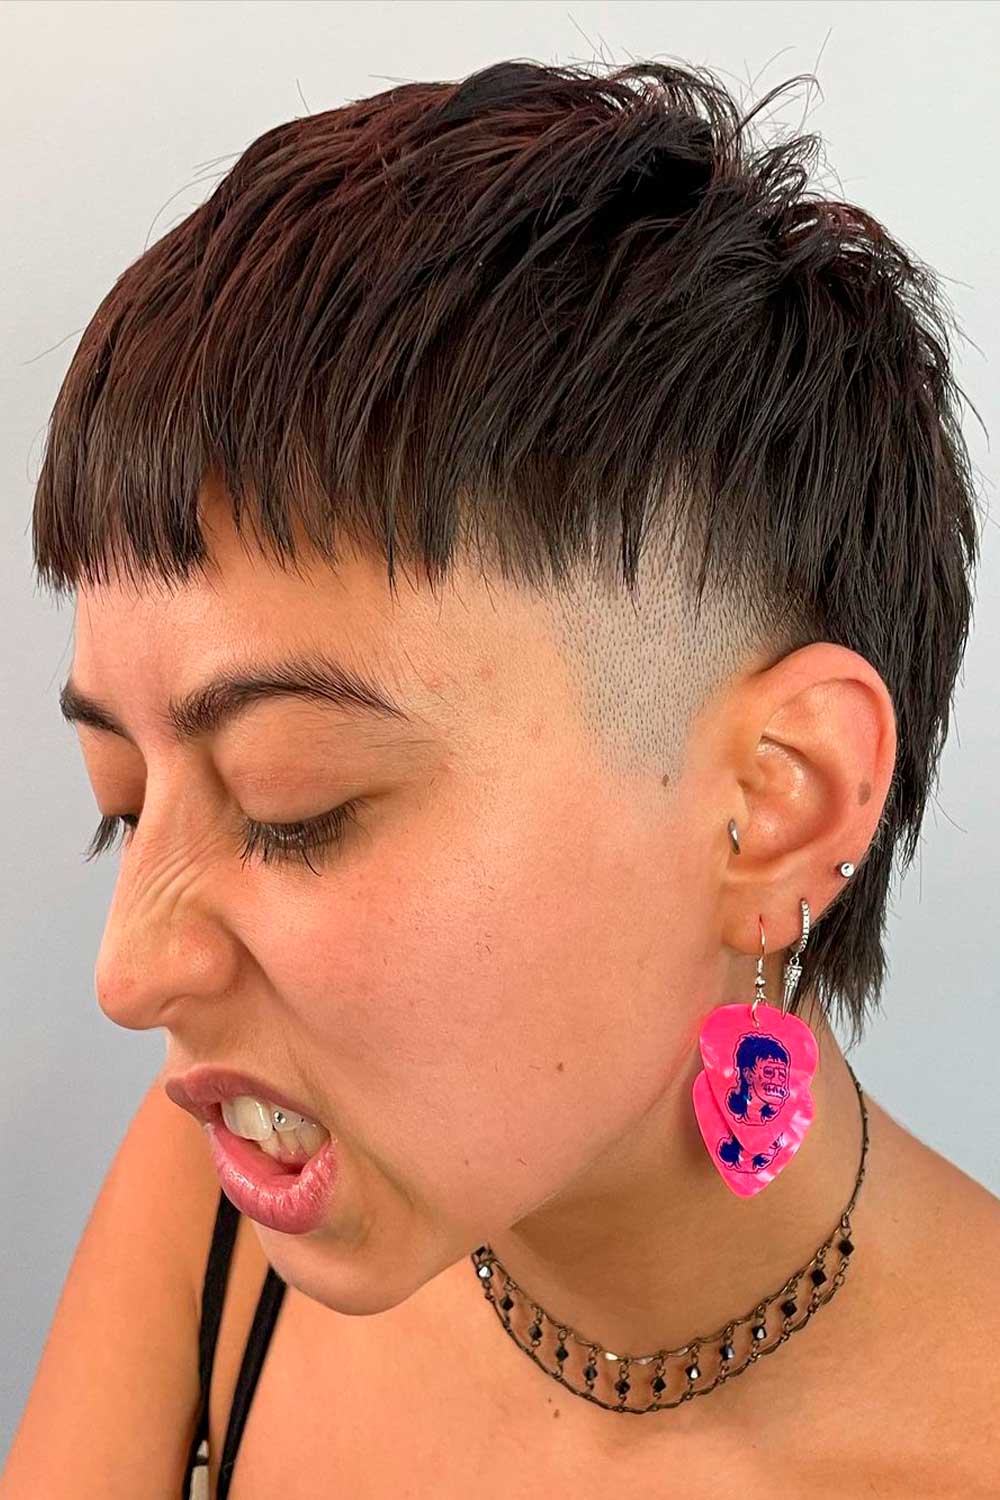 Short Hairstyle With Shaved Temple #undercuthairstyles #undercutwomen